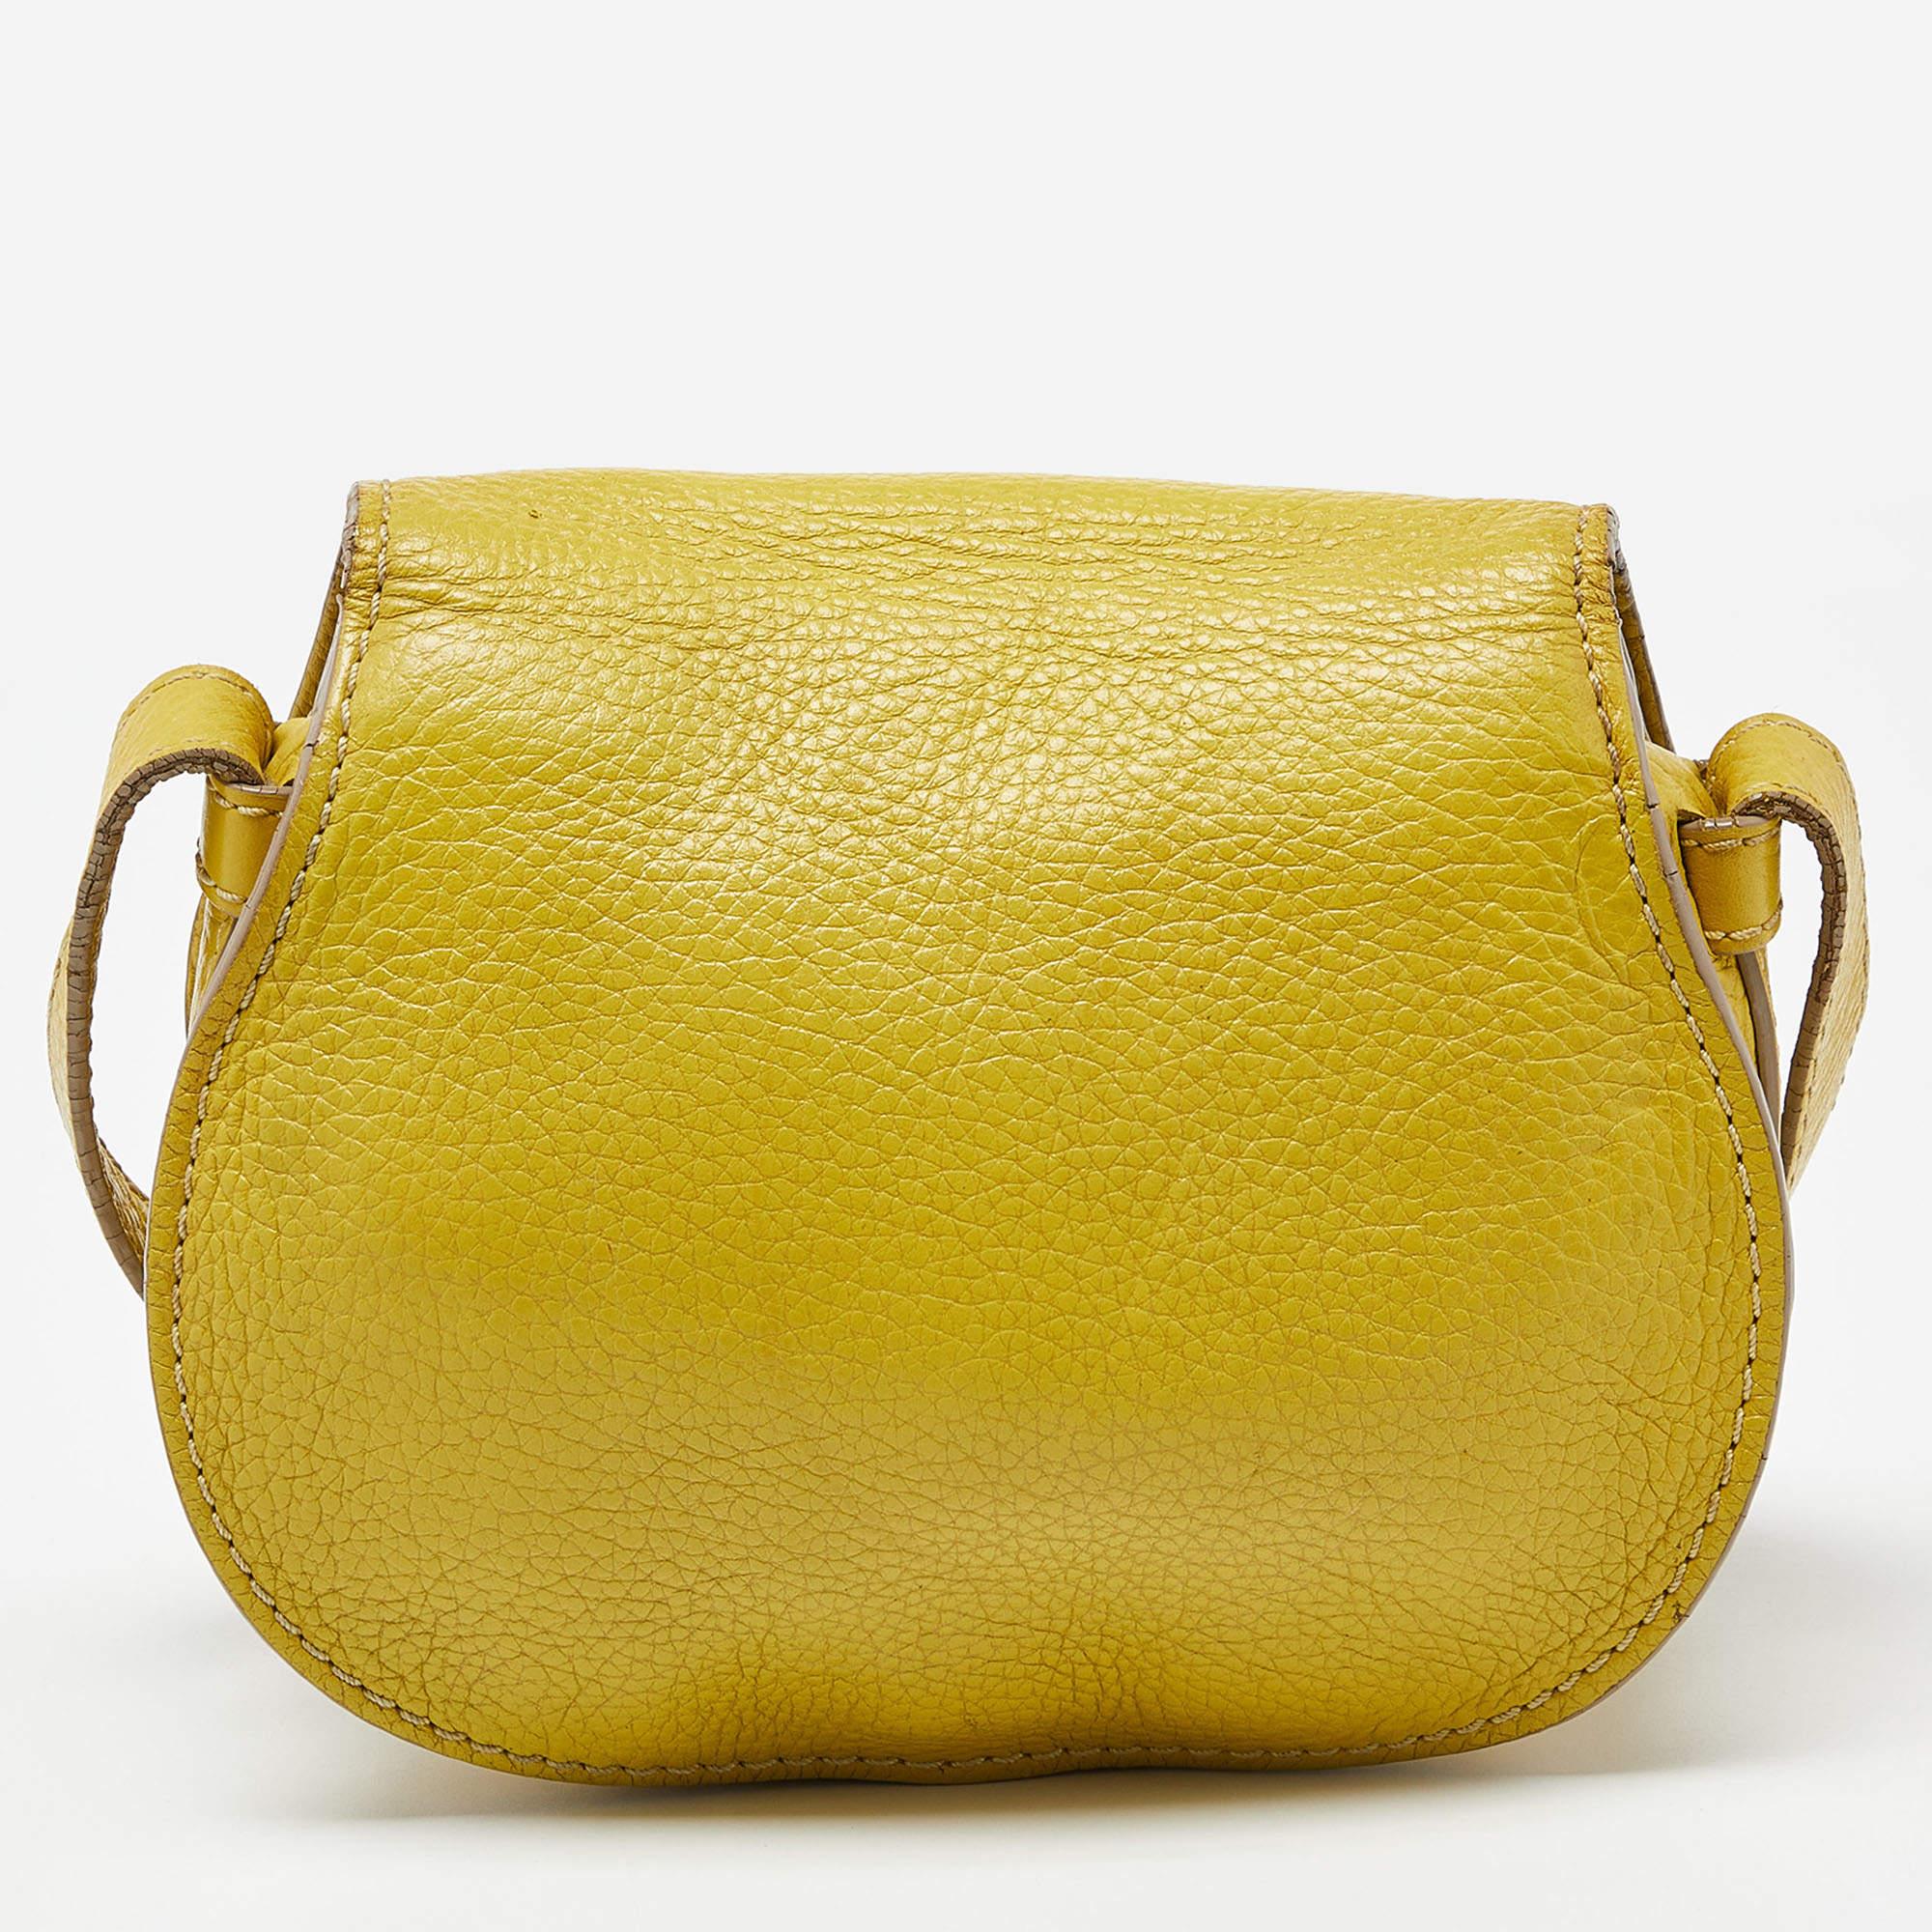 Chloe Yellow Leather Small Marcie Crossbody Bag For Sale 7